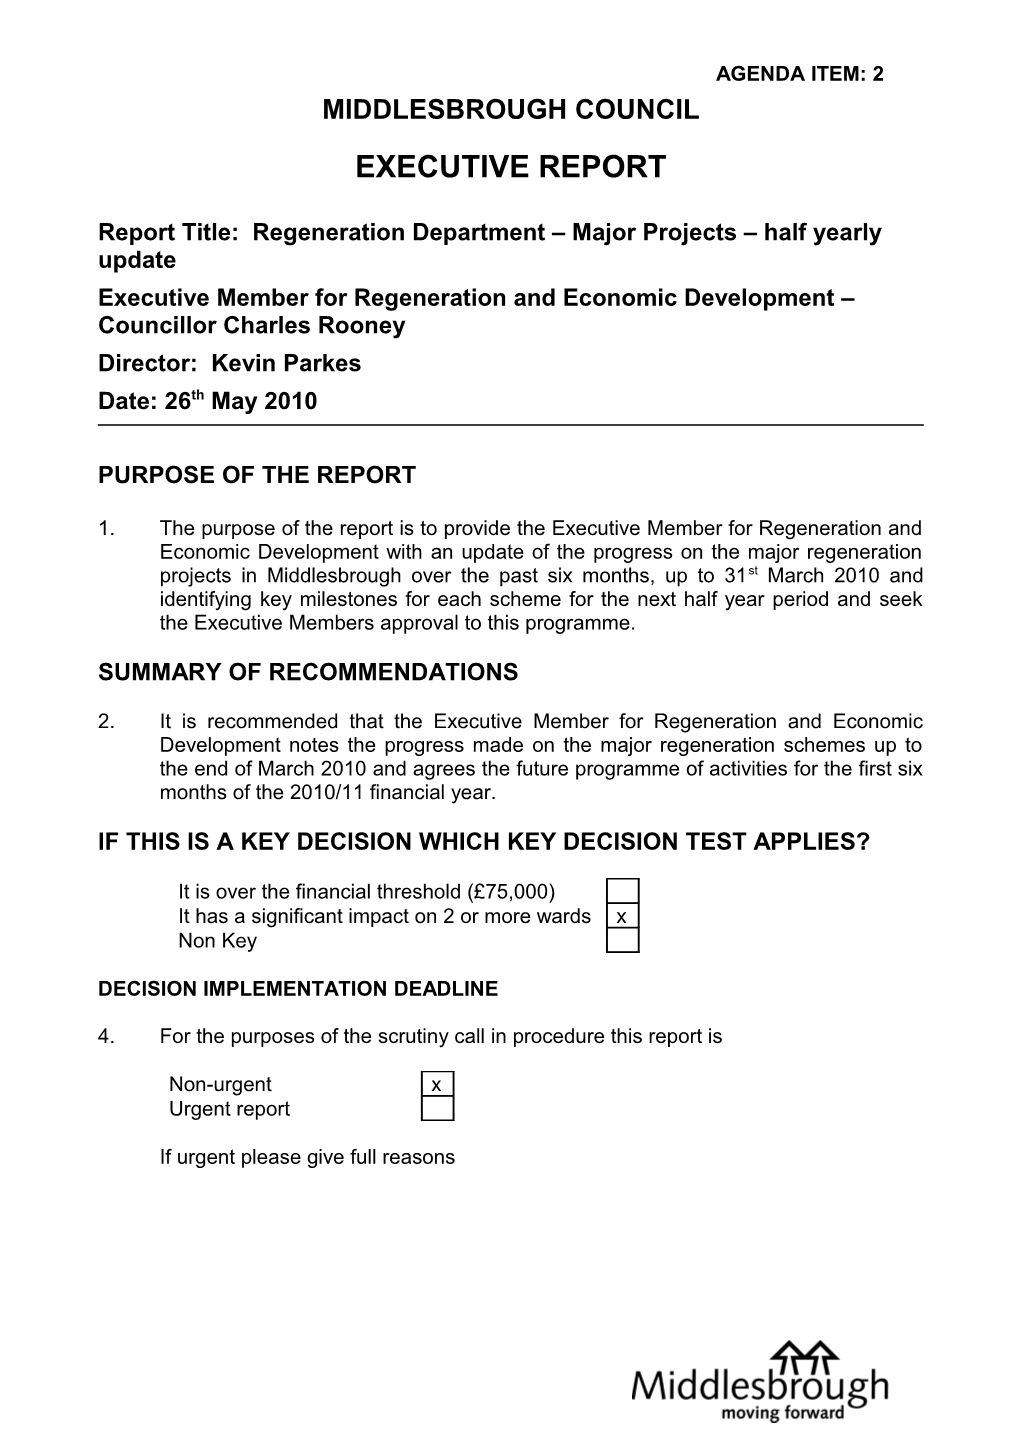 Report Title: Regeneration Department Major Projects Half Yearly Update